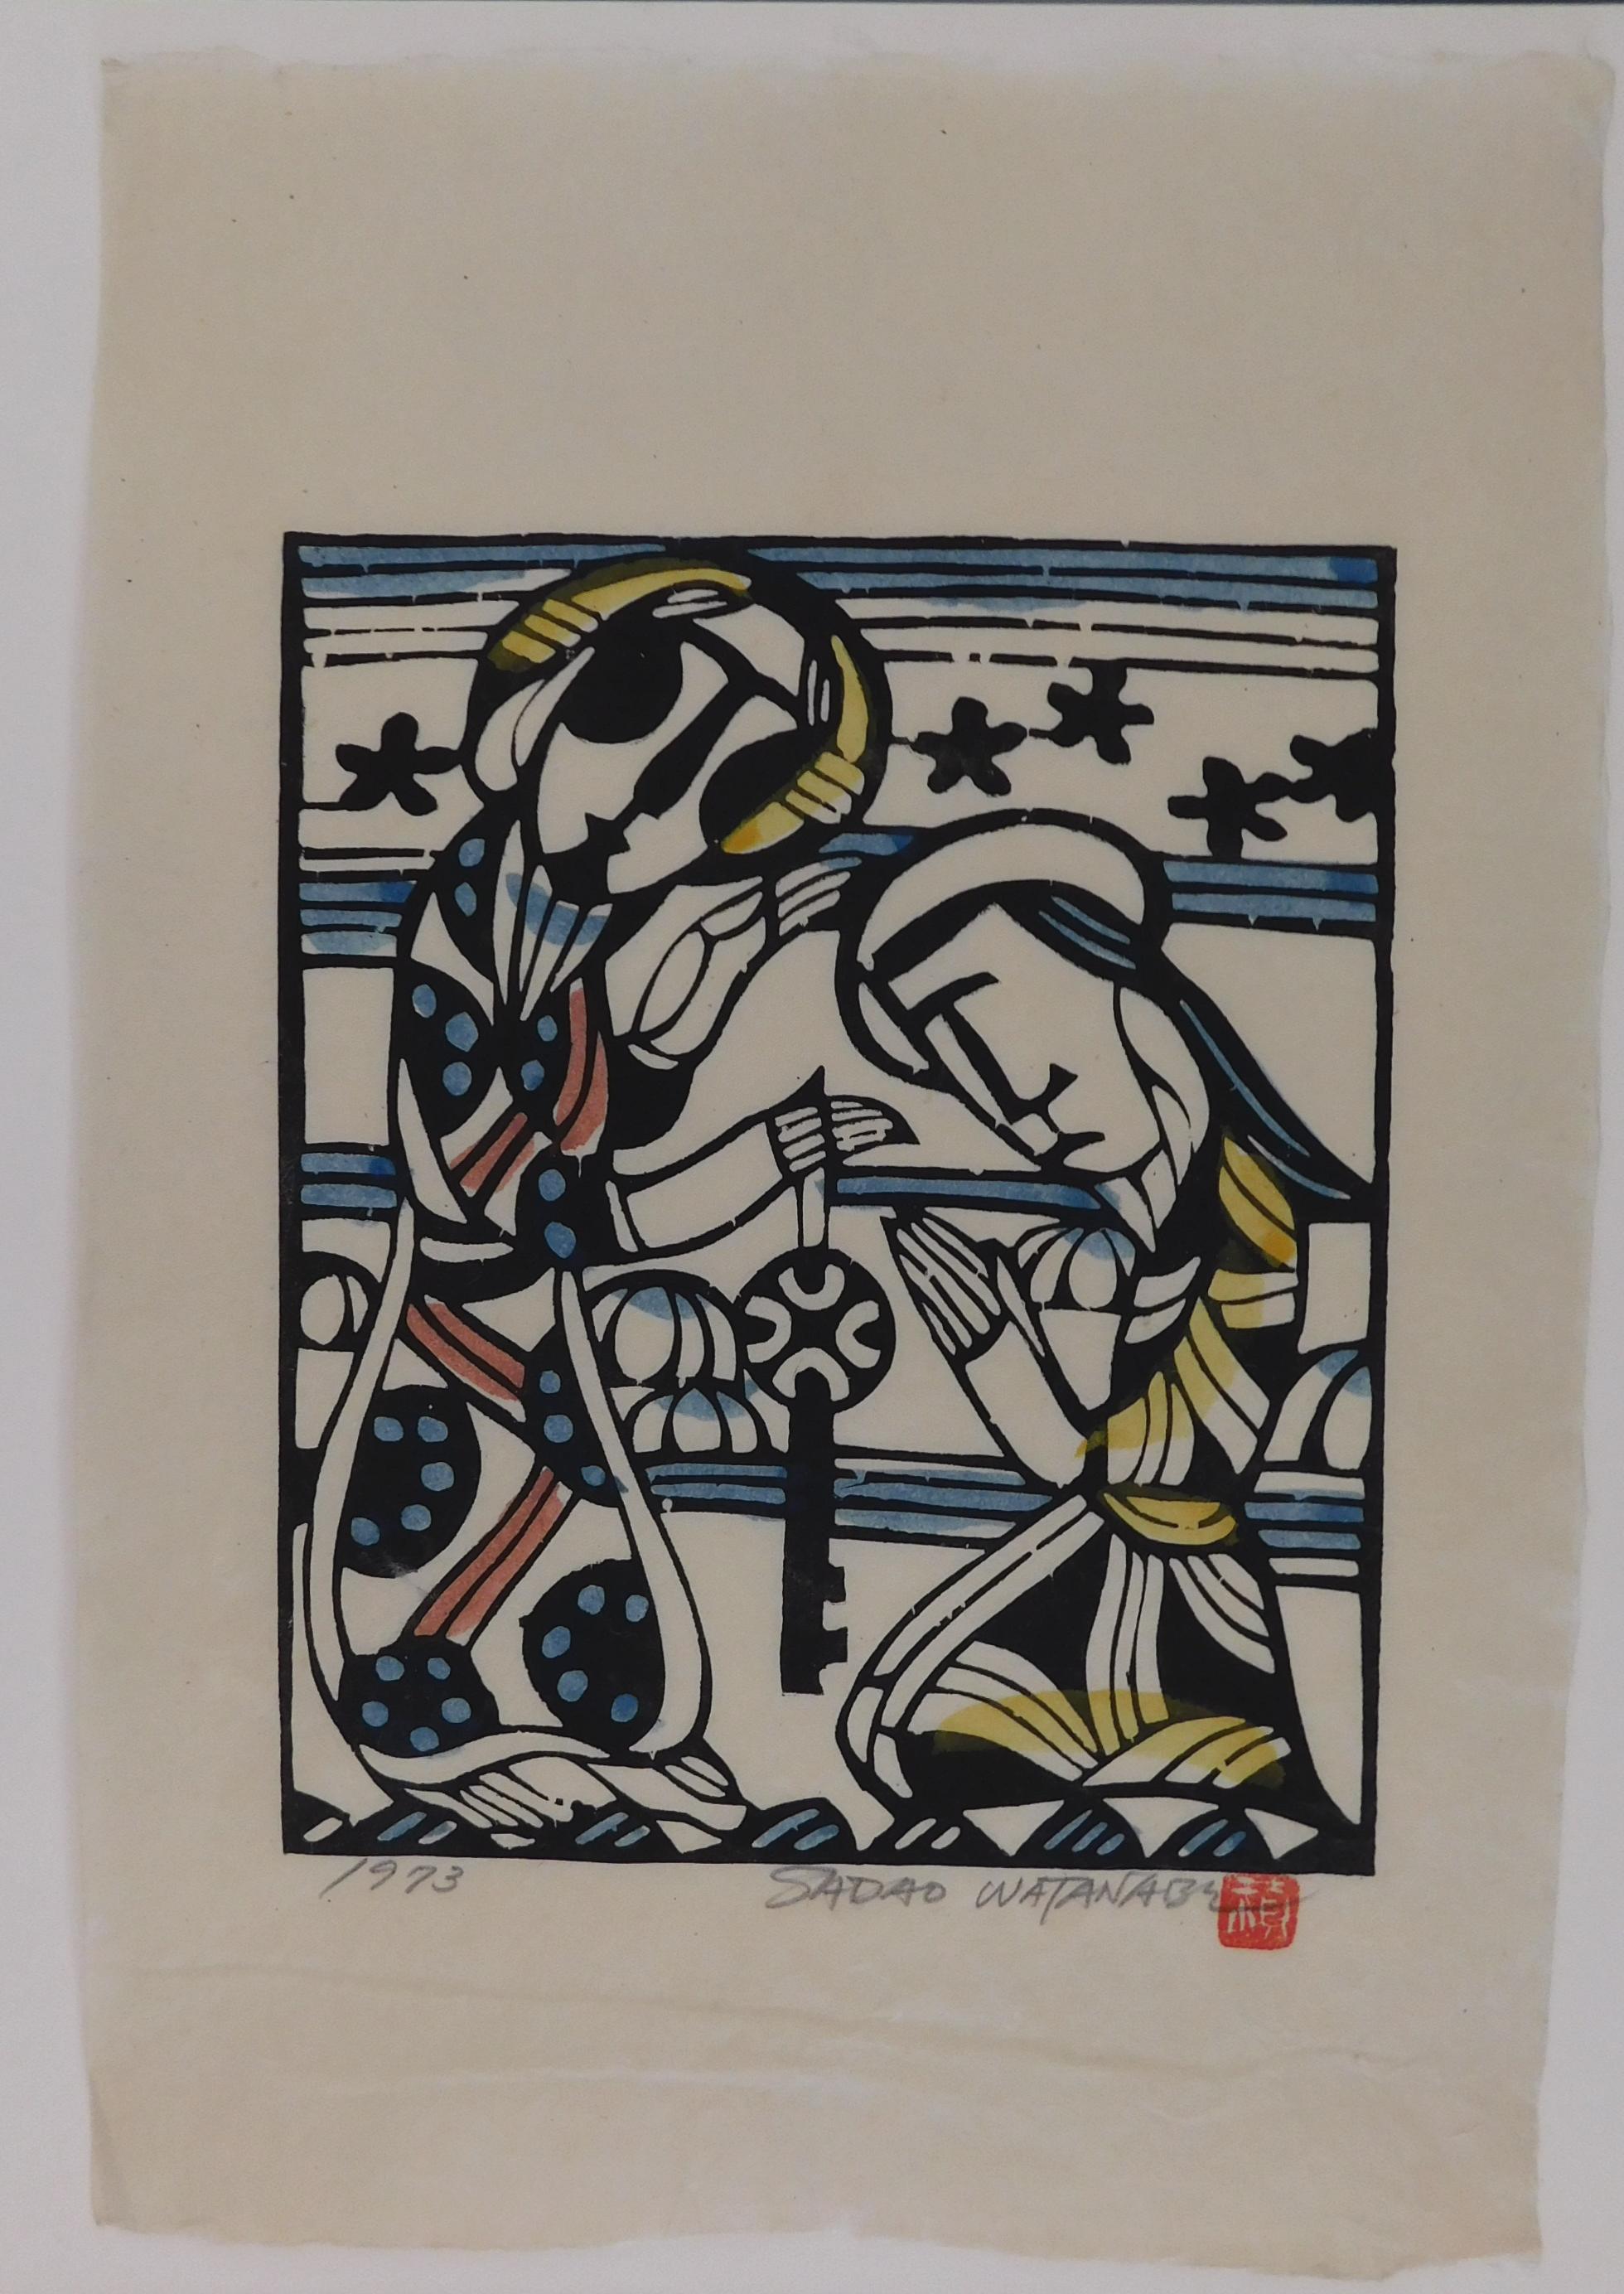 Stencil Print by Sadao Watanabe, hand colored on hand-made washi paper.
This image depicts the words in Mathew 16:19 when Christ gives great authority
to Peter saying: I will give you the Keys of the Kingdom of Heaven.
Artist’s chop mark and pencil